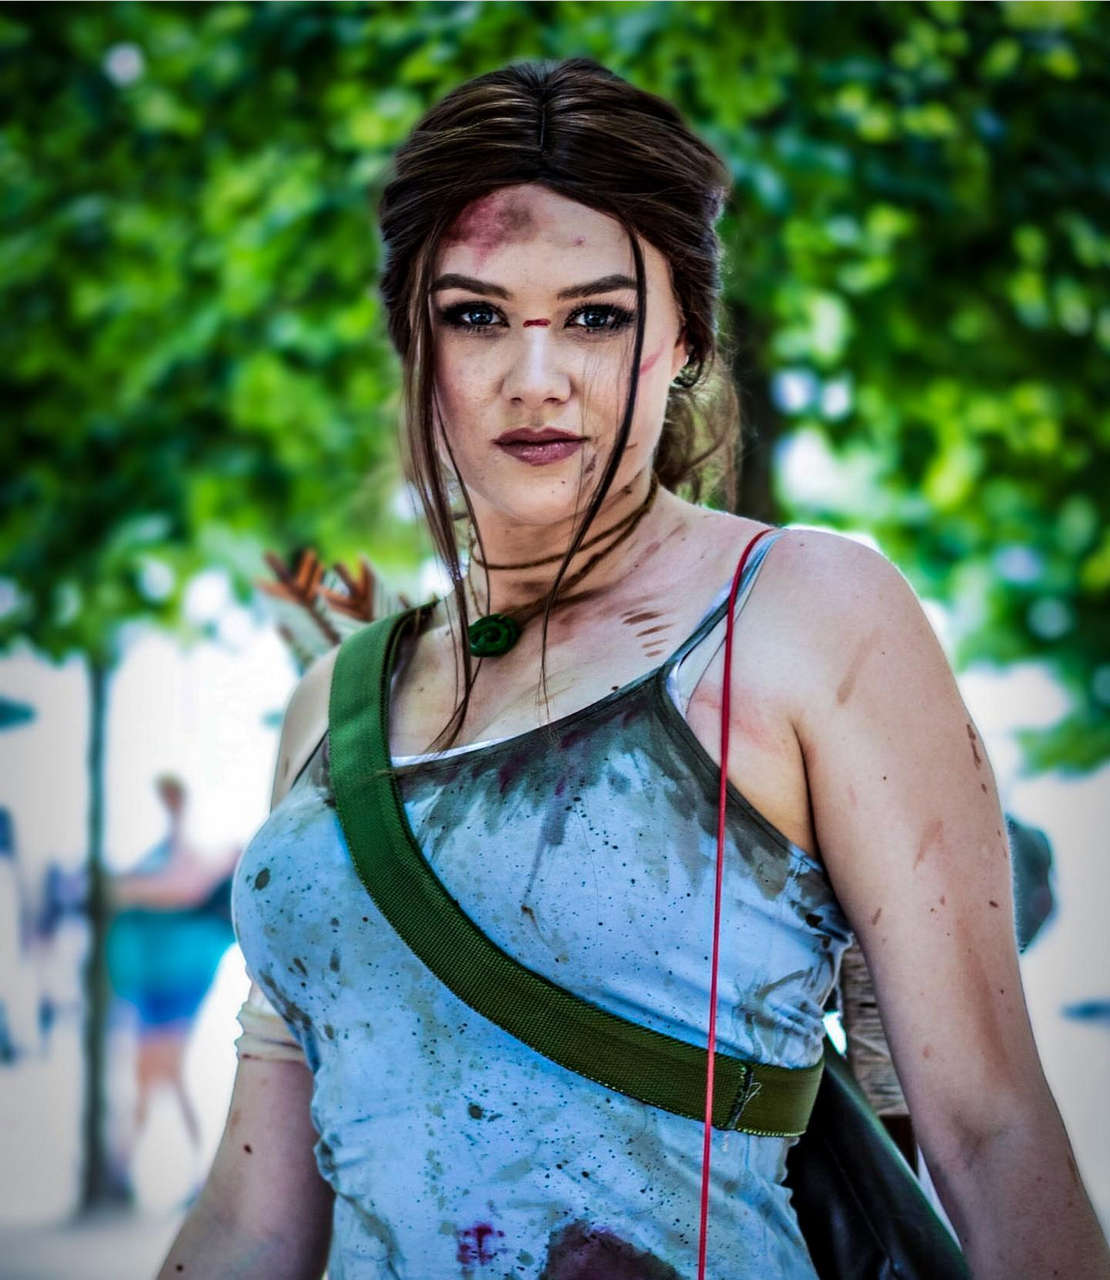 Self Lara Croft Cosplay By Katiedoescosplay Photo By Thatveeps On Inst